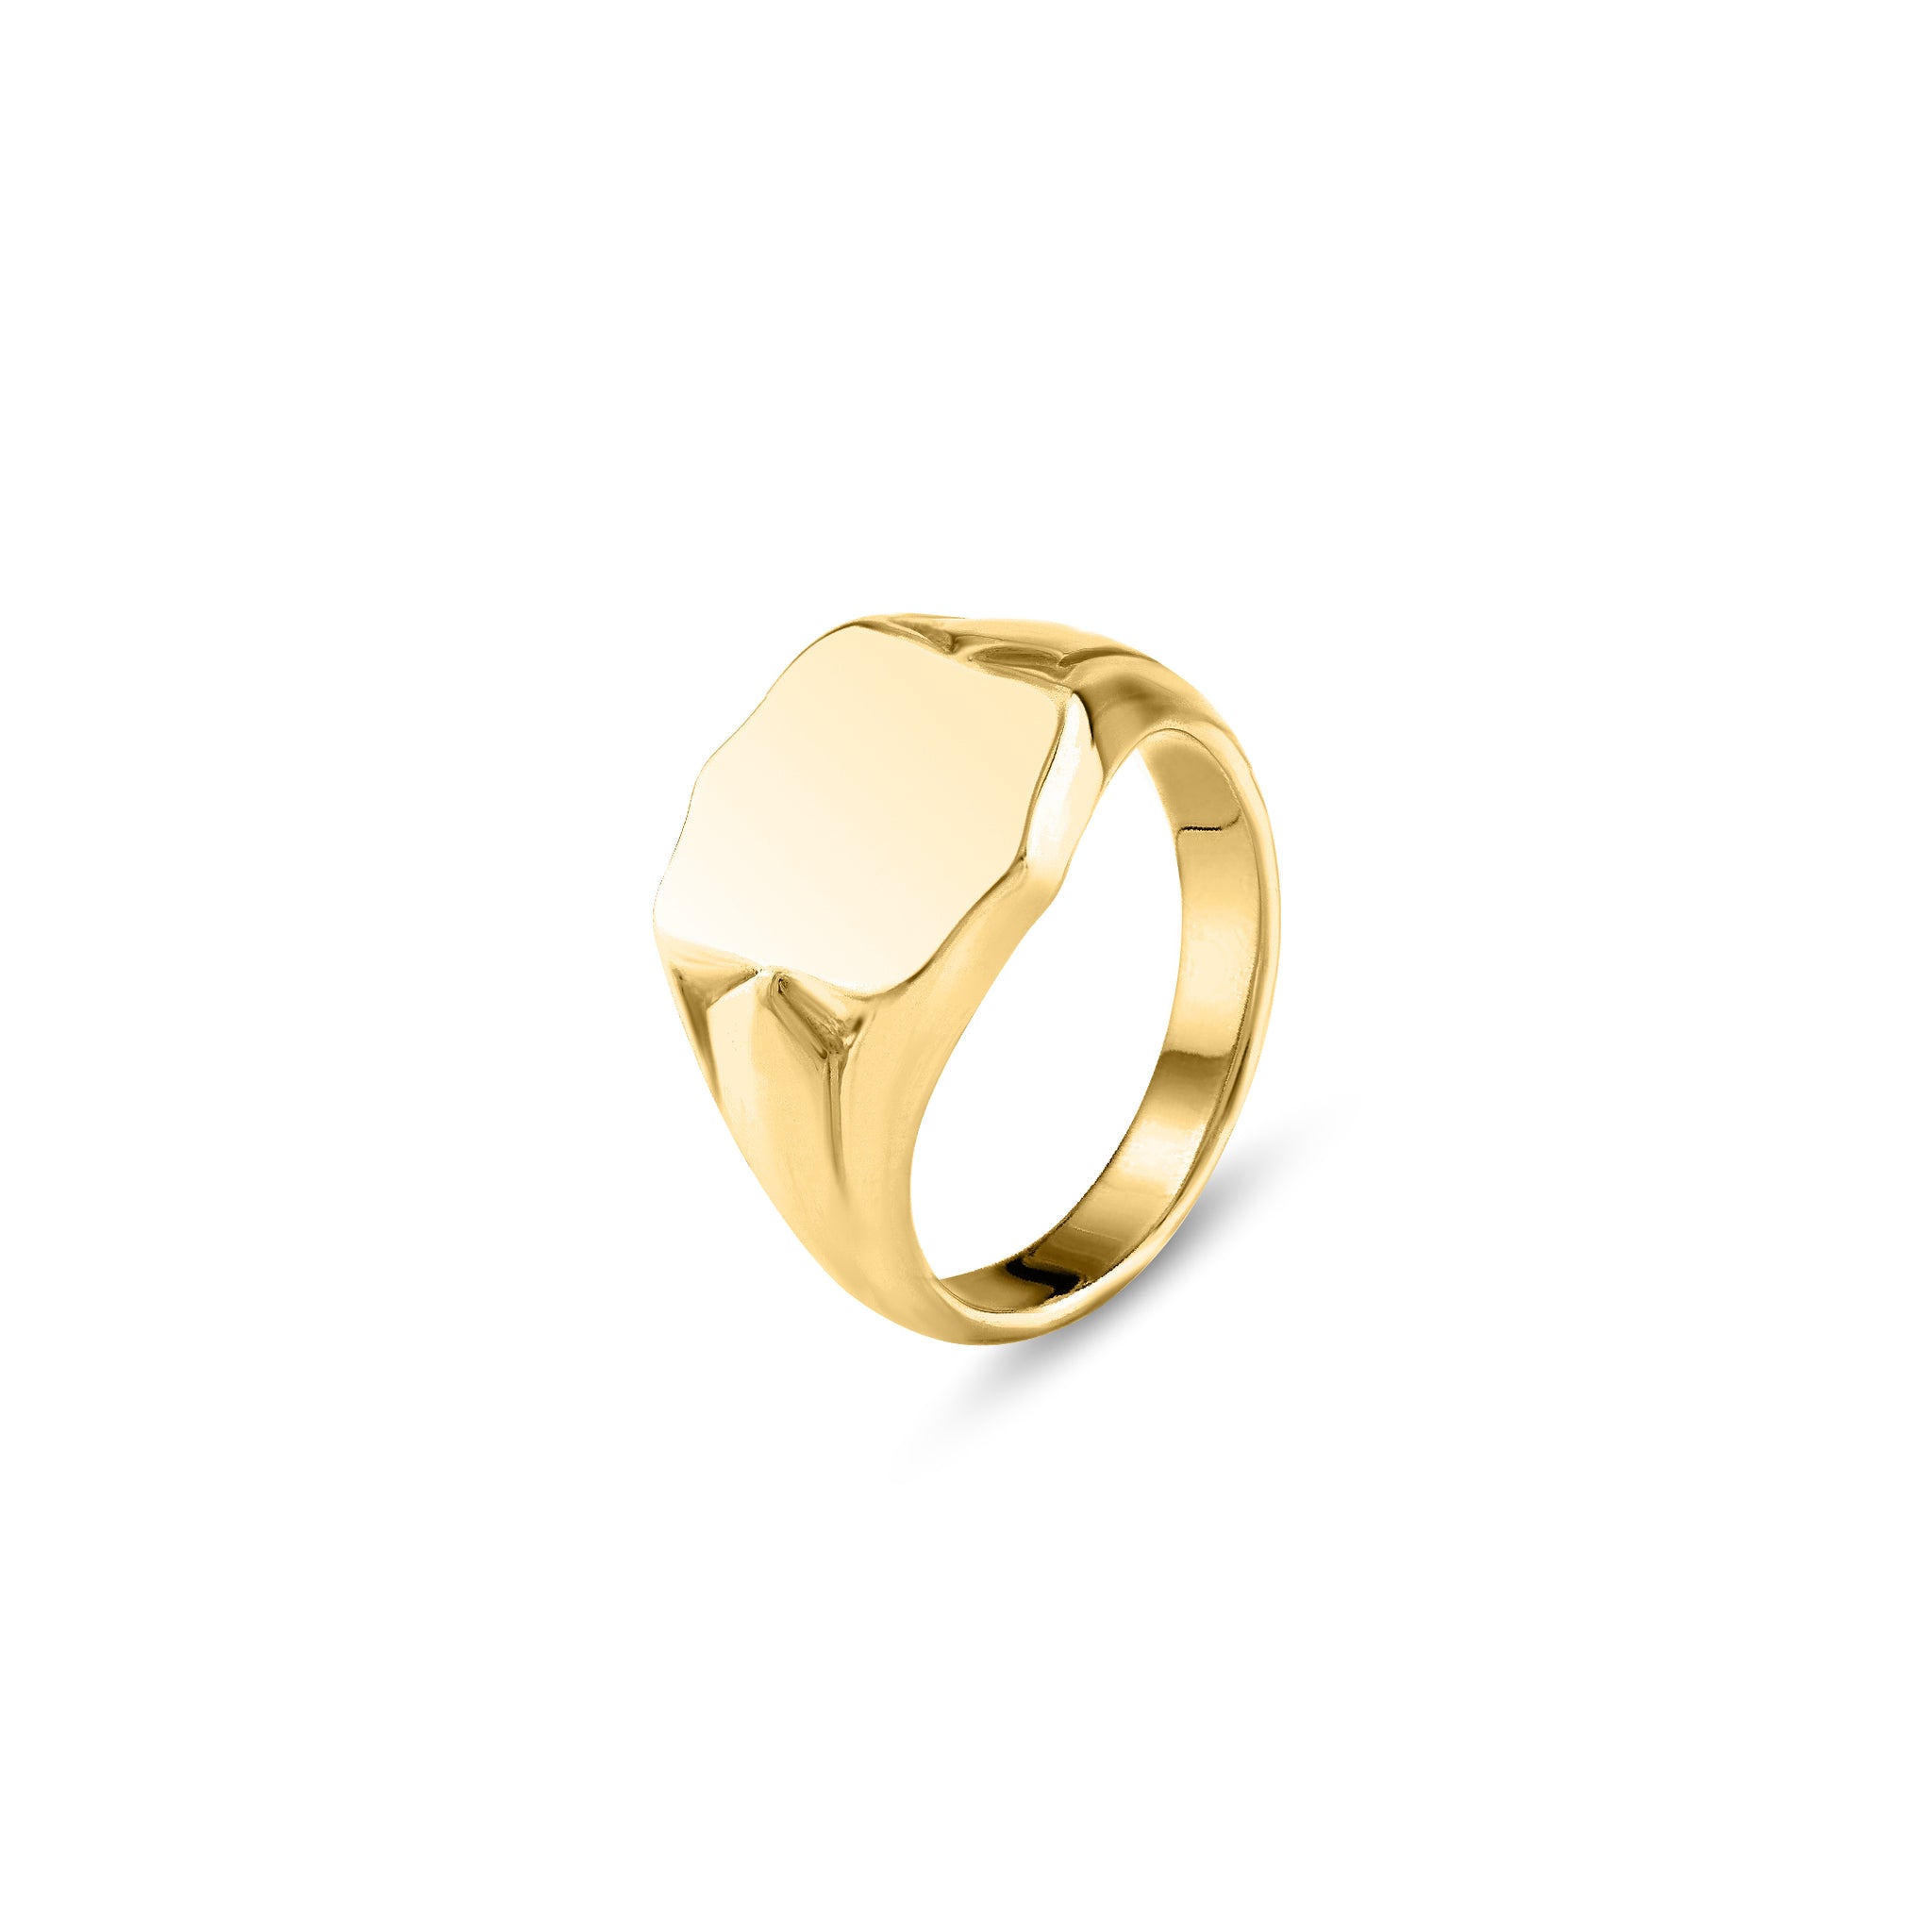 The Anthony Paul Signet Ring